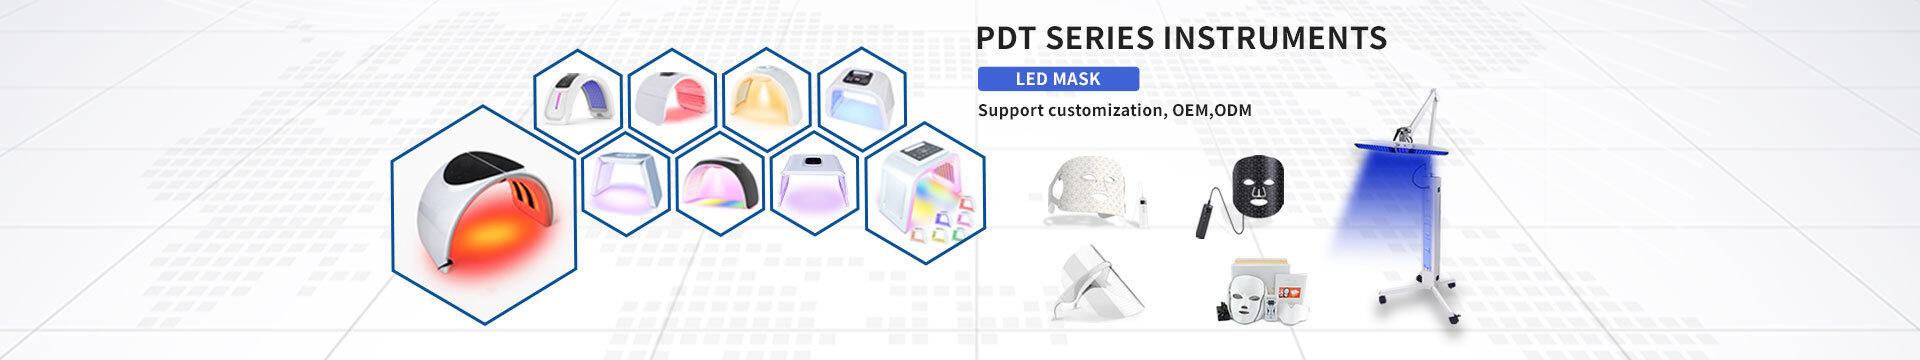 LED Photontherapy series included 4 Colors LED Facial Mask, 7 Colors LED Facial Mask, Foldable PDT machine, PDT machine with holder